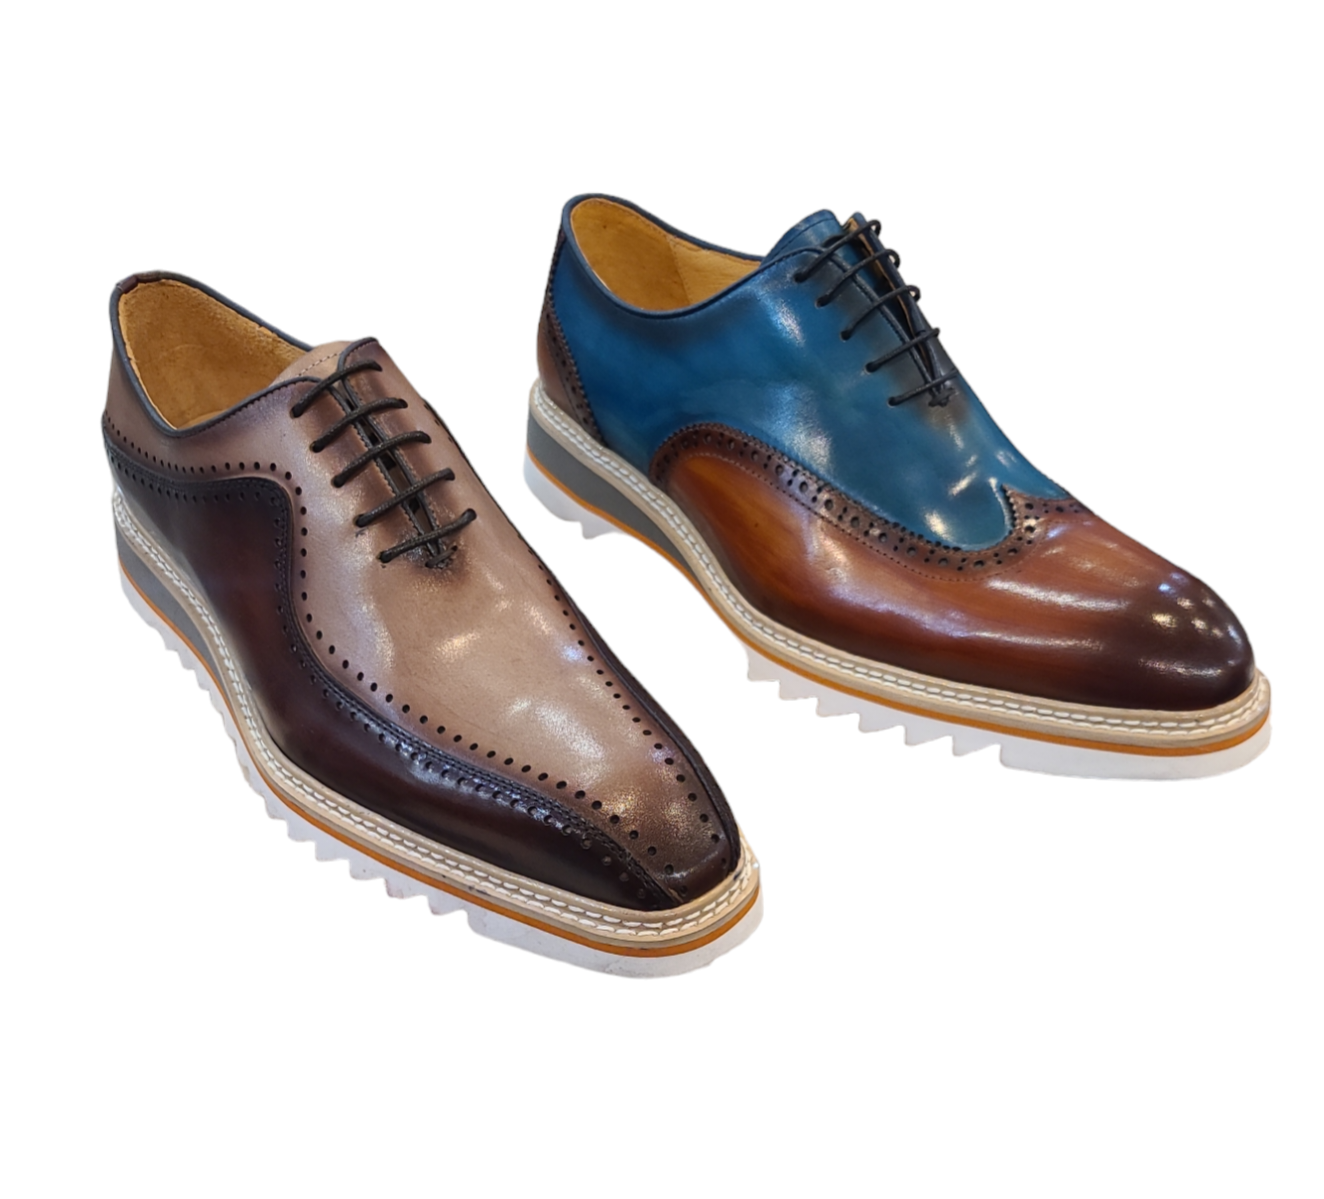 Carrucci Two-tone Wingtip Shoes